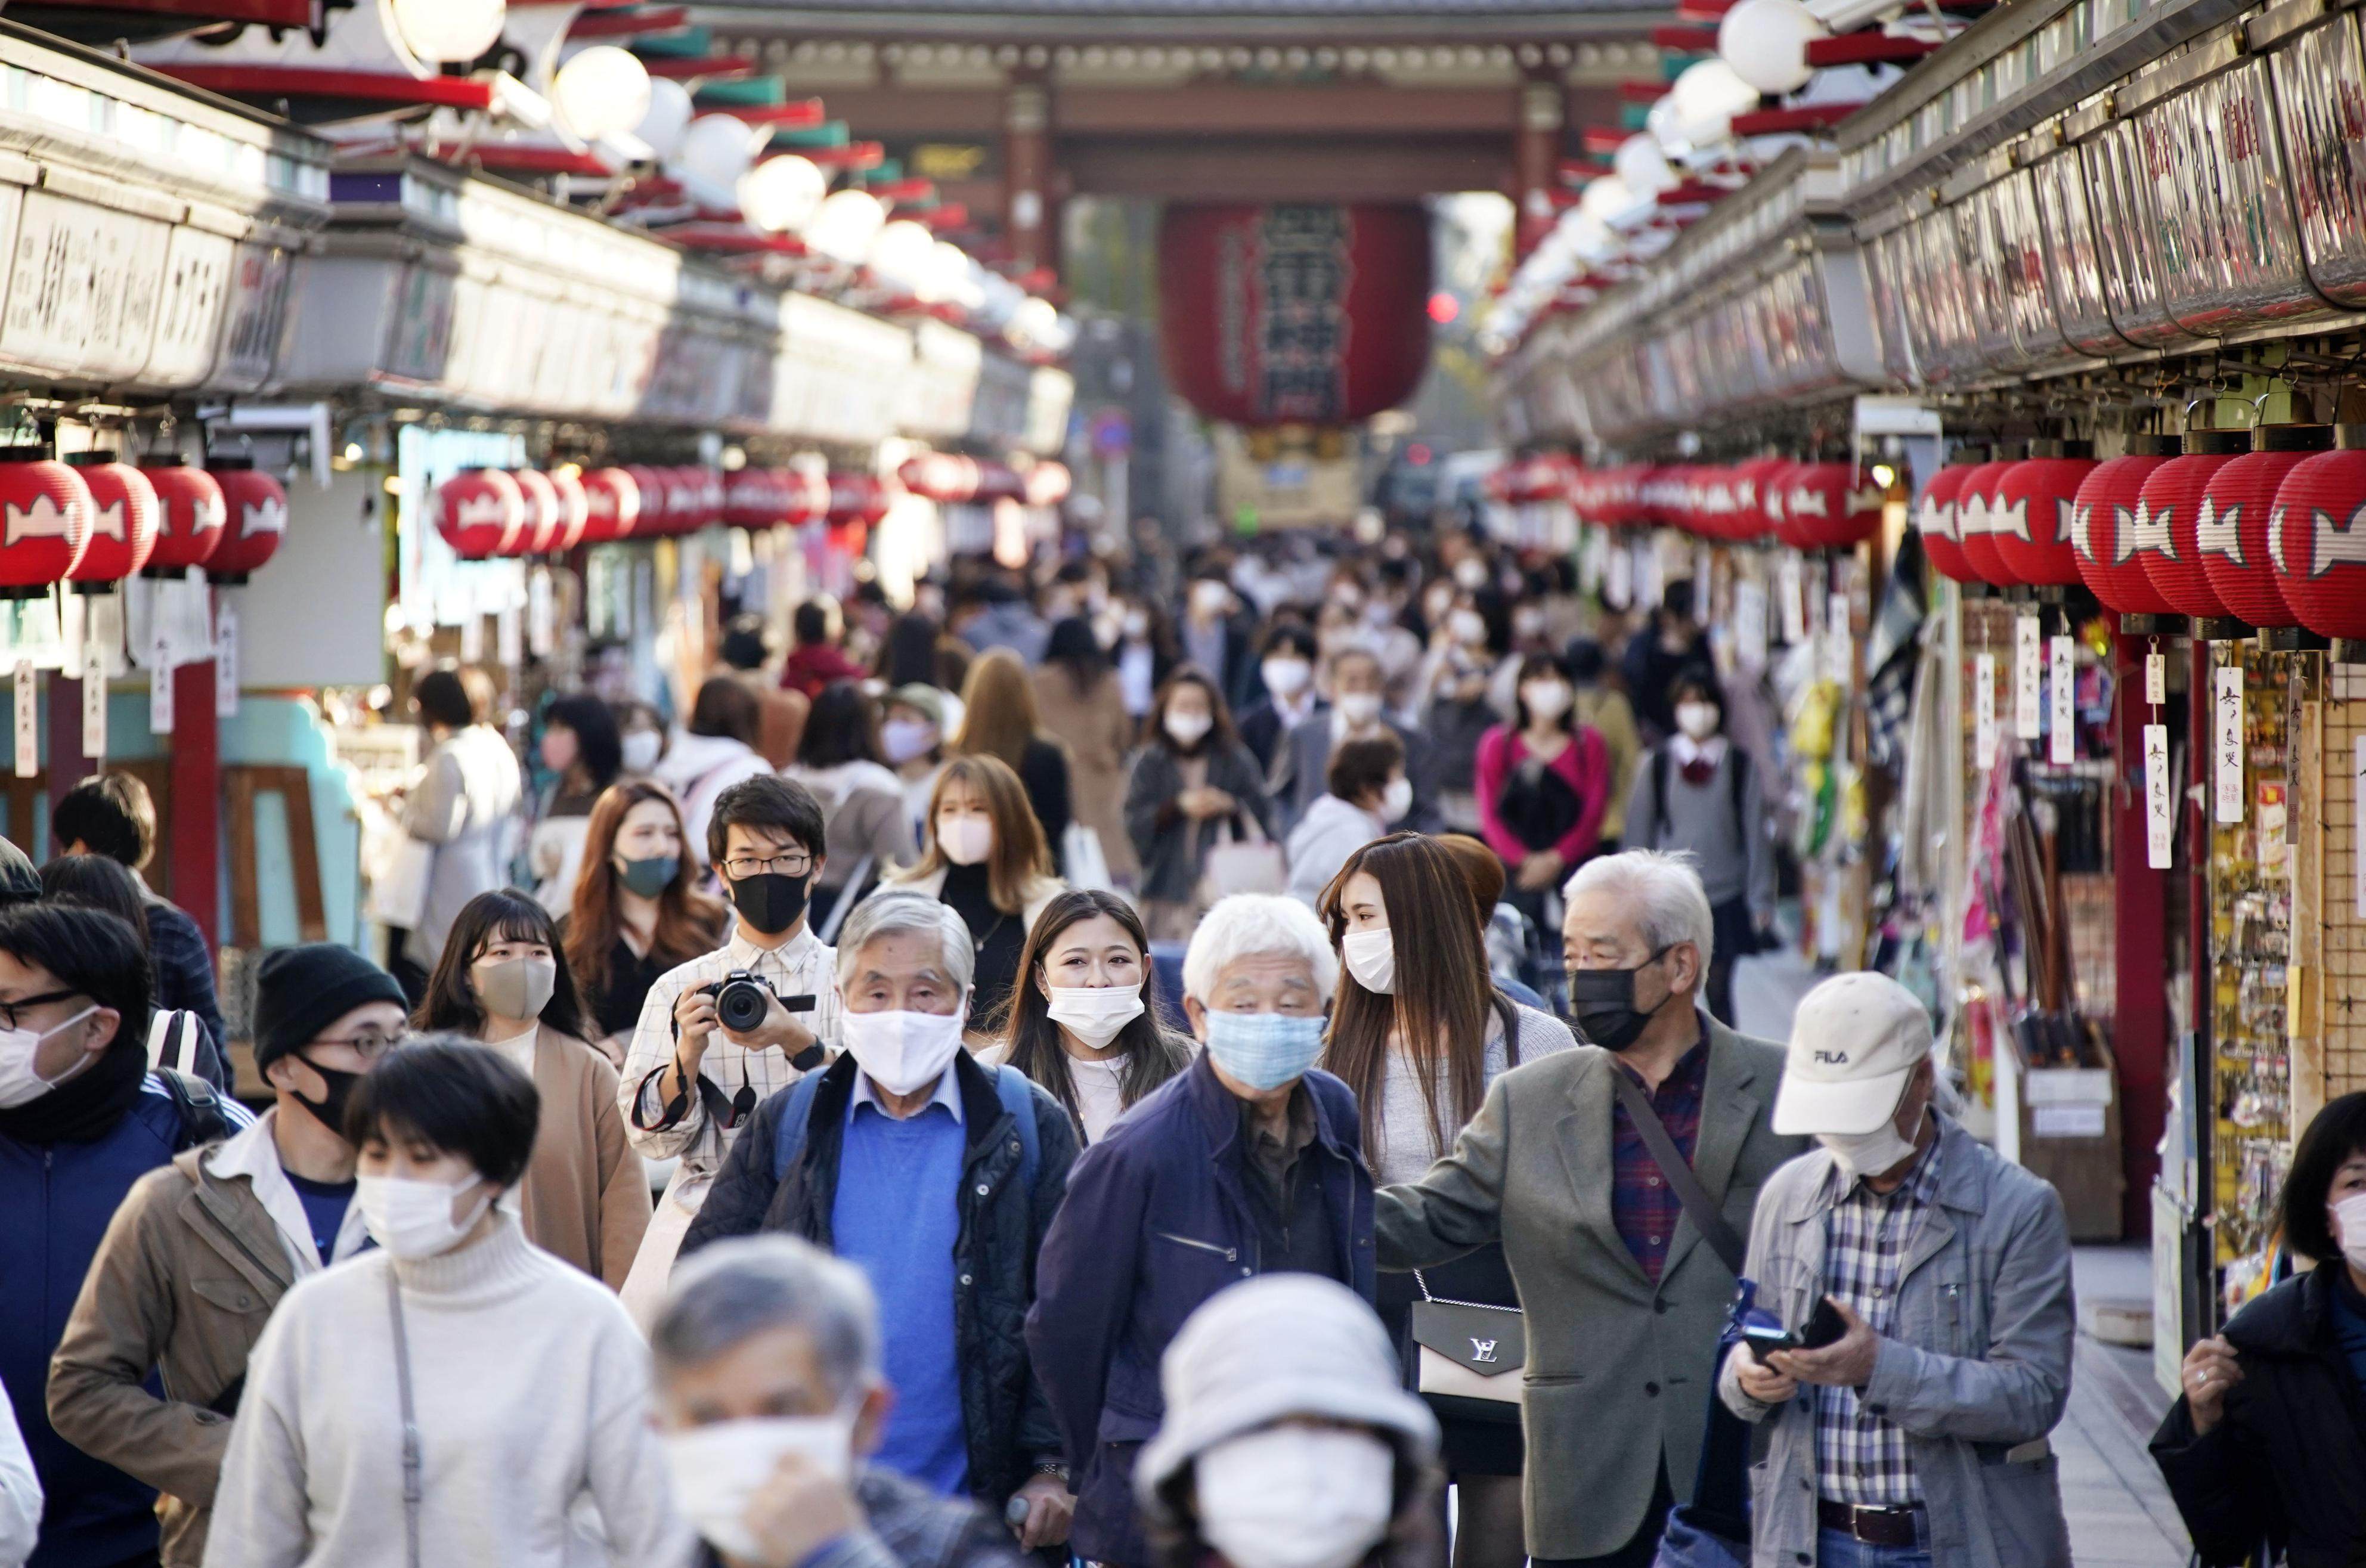 Elderly people walk with others through the Asakusa area of Tokyo. South Korea’s central bank chief thinks Japan’s ‘sideshow’ of using stimulus to combat the challenges of an ageing economy is best avoided. Photo: Kyodo